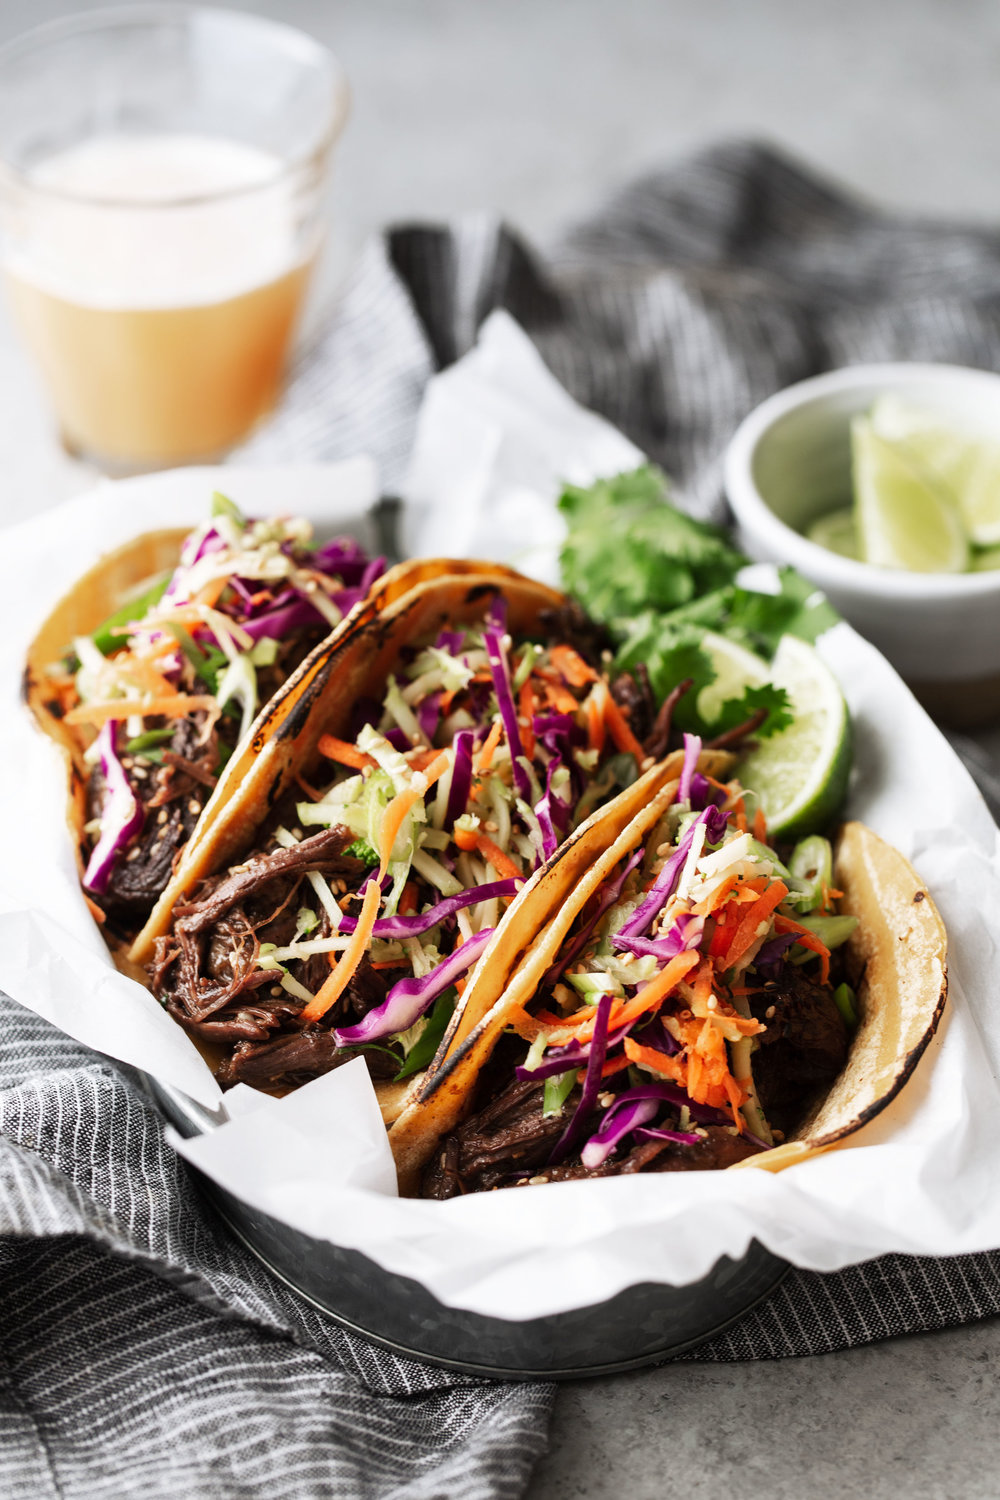 Braised Korean BBQ Beef Tacos recipe from cooking with cocktail rings